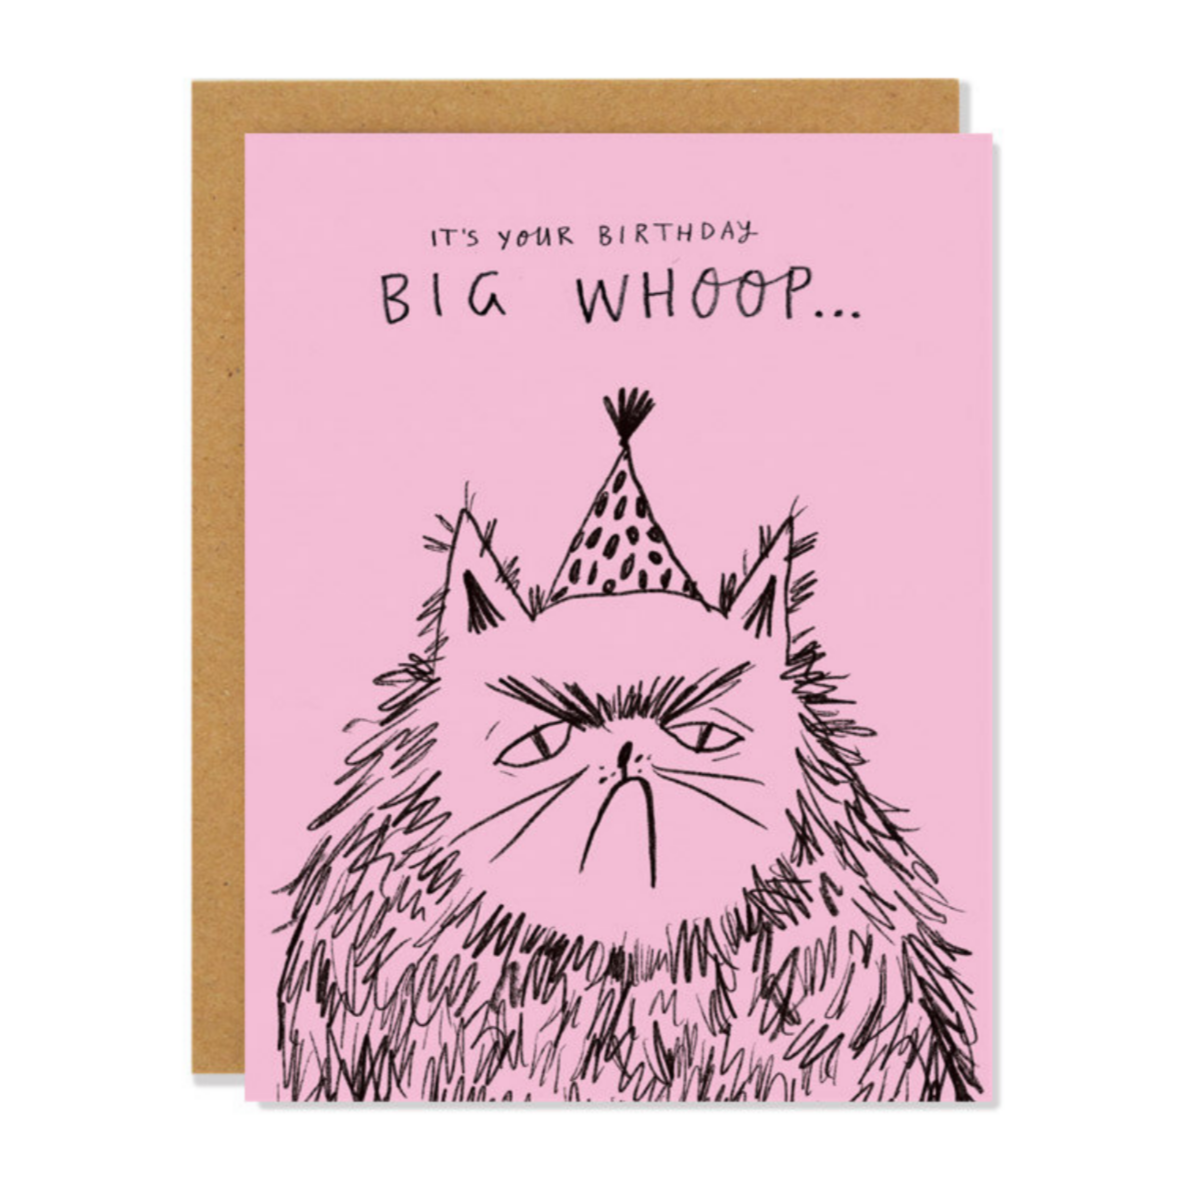 pink card with drawing of grumpy cat wearing party hat that reads "It's your birthday BIG WHOOP..."